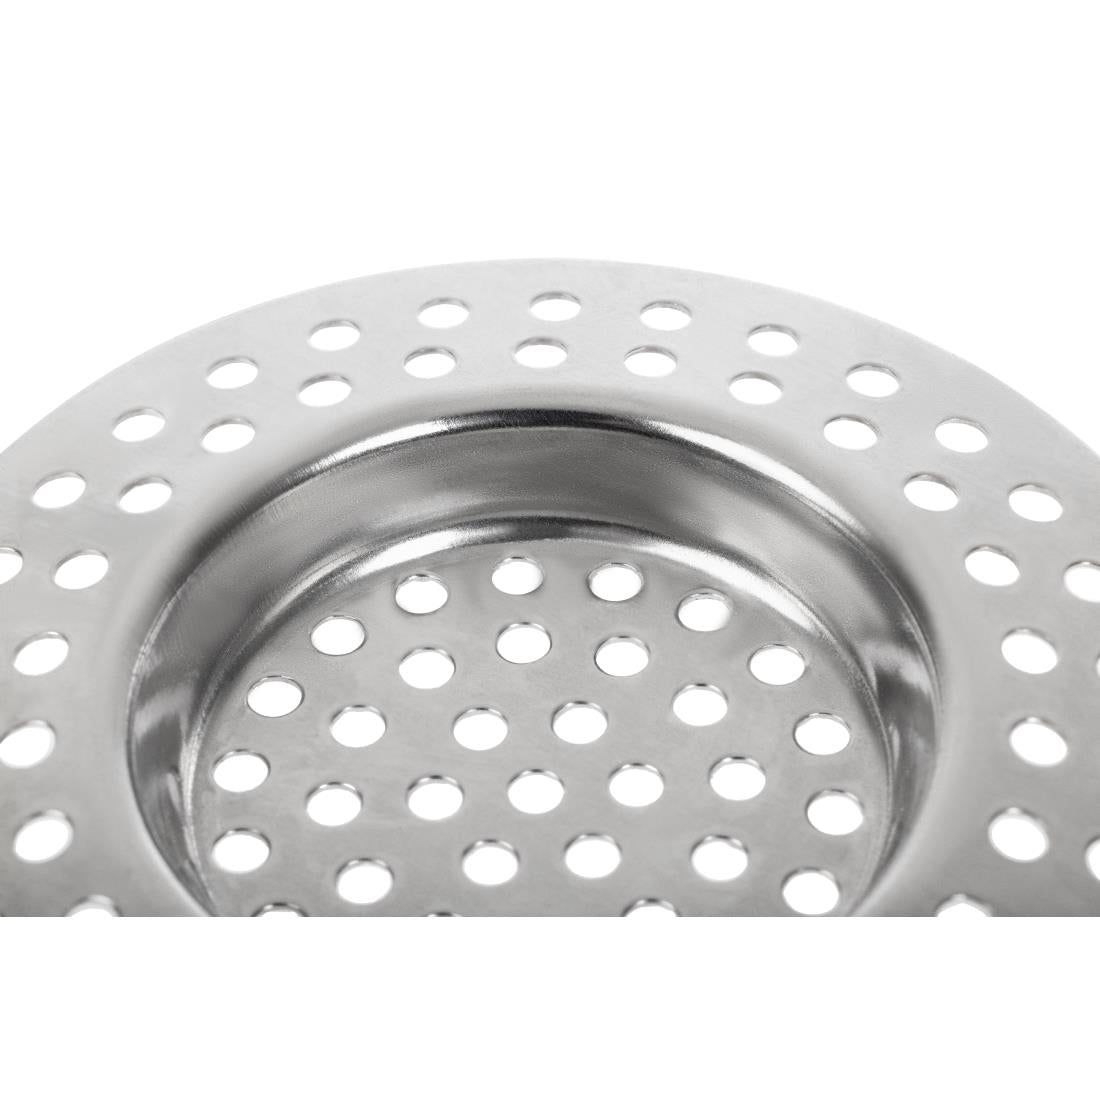 DB902 KitchenCraft Stainless Steel Large Hole Sink Strainer 75mm JD Catering Equipment Solutions Ltd